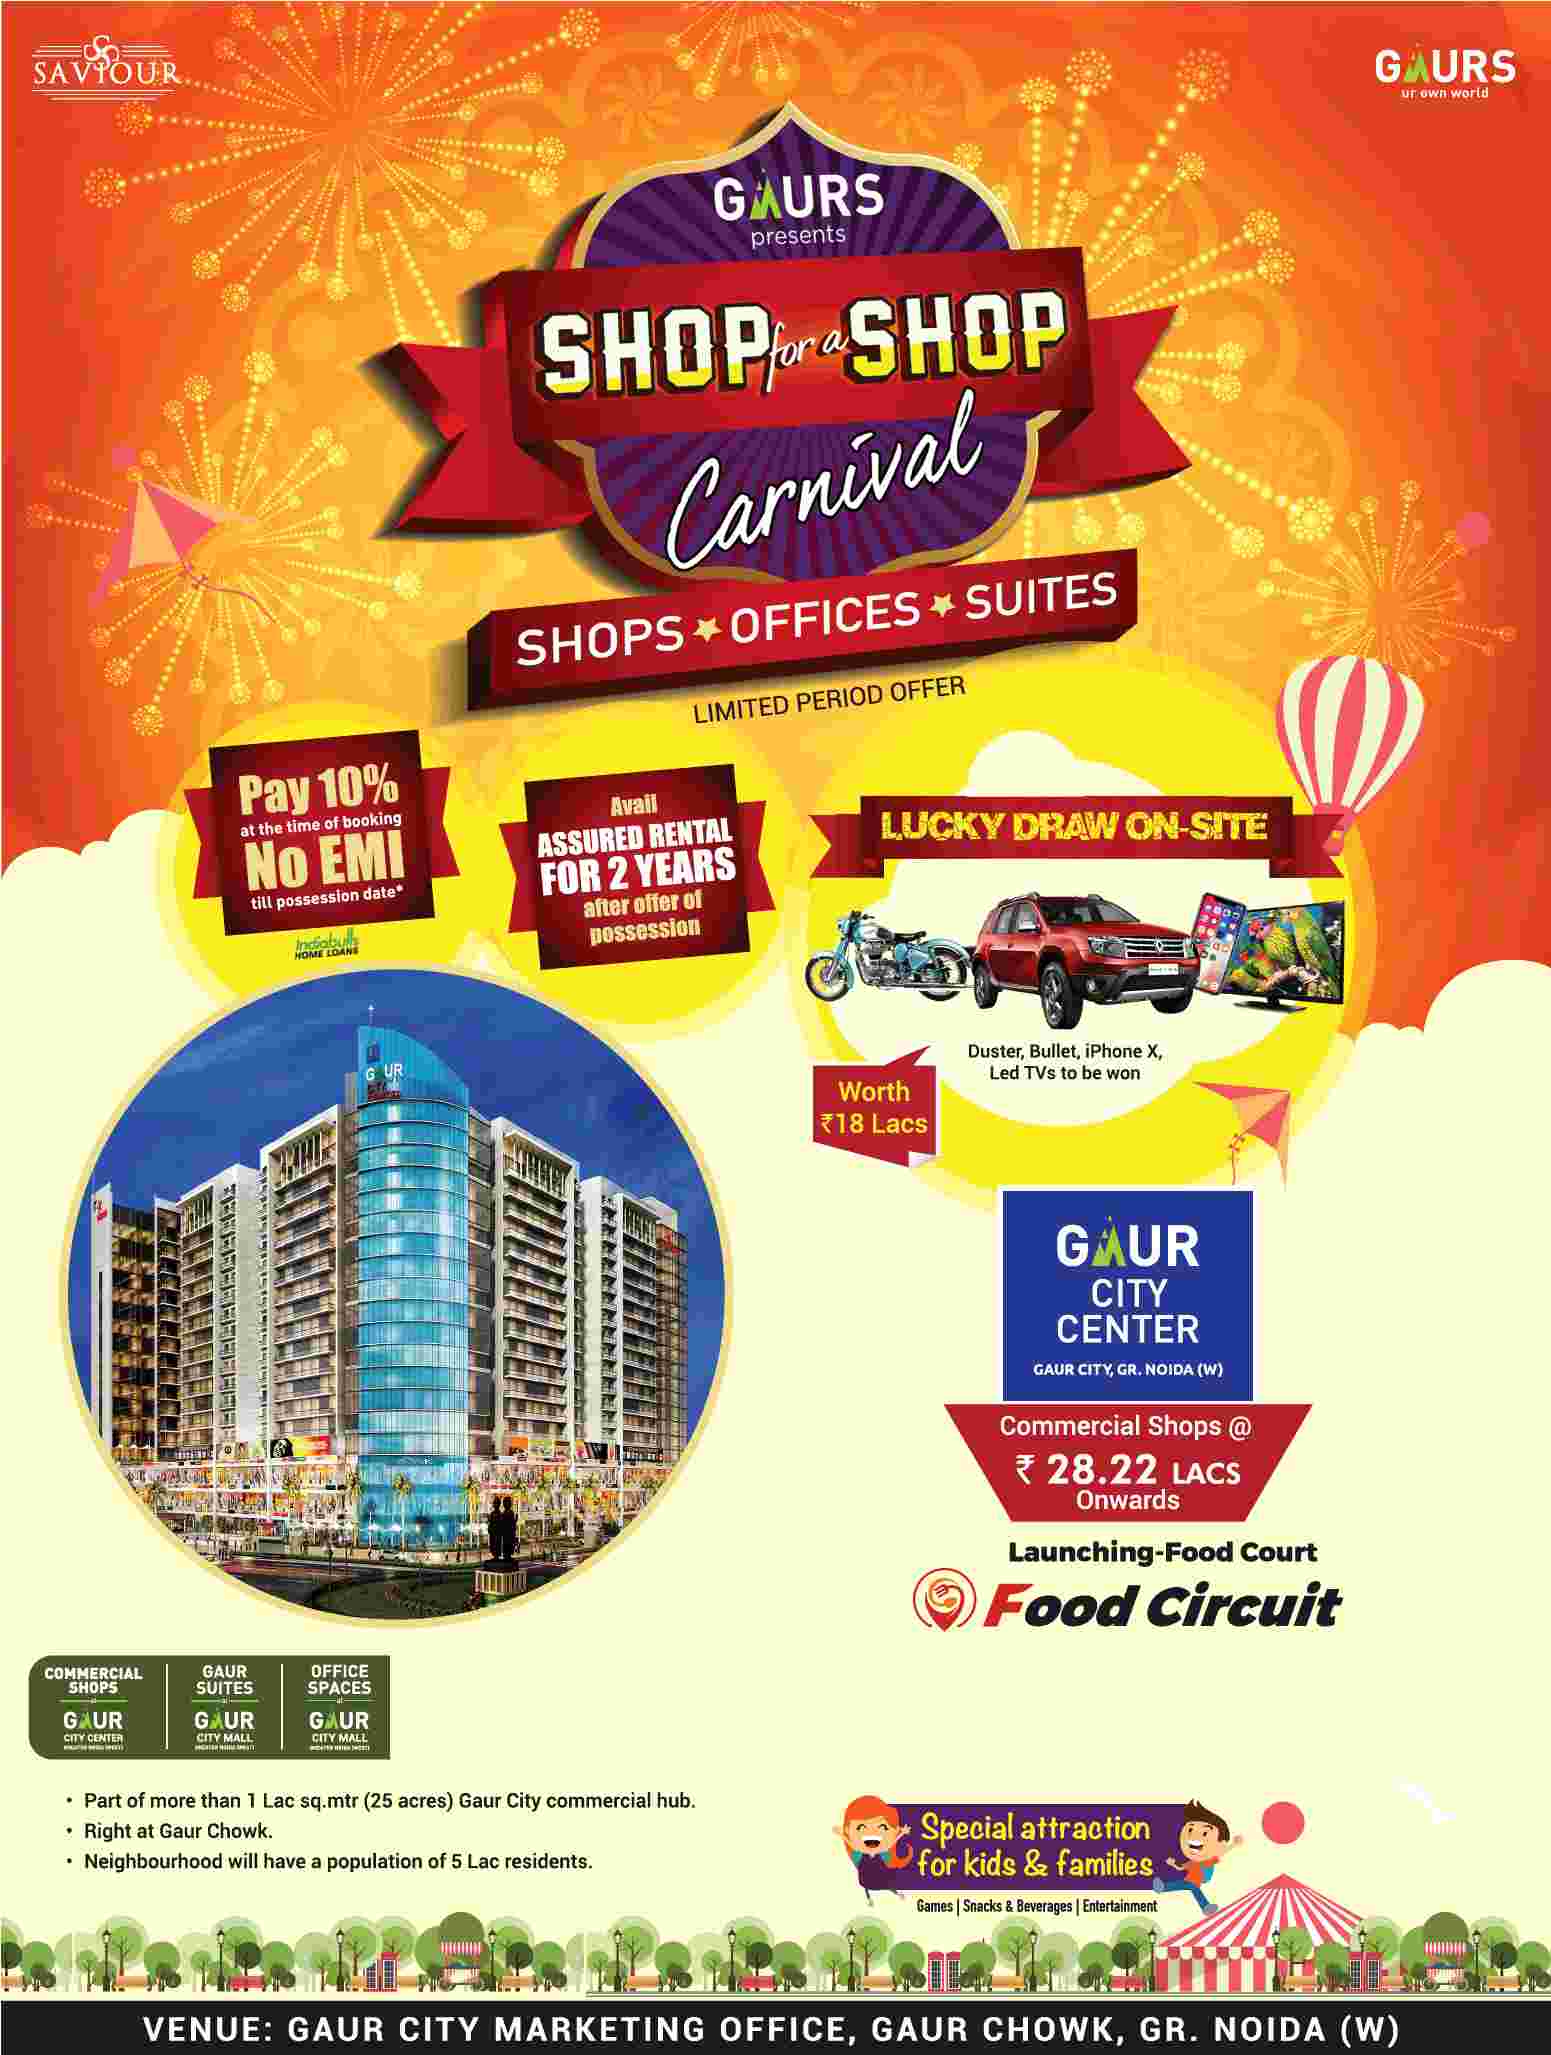 Gaurs presents shop for a shop carnival in Greater Noida